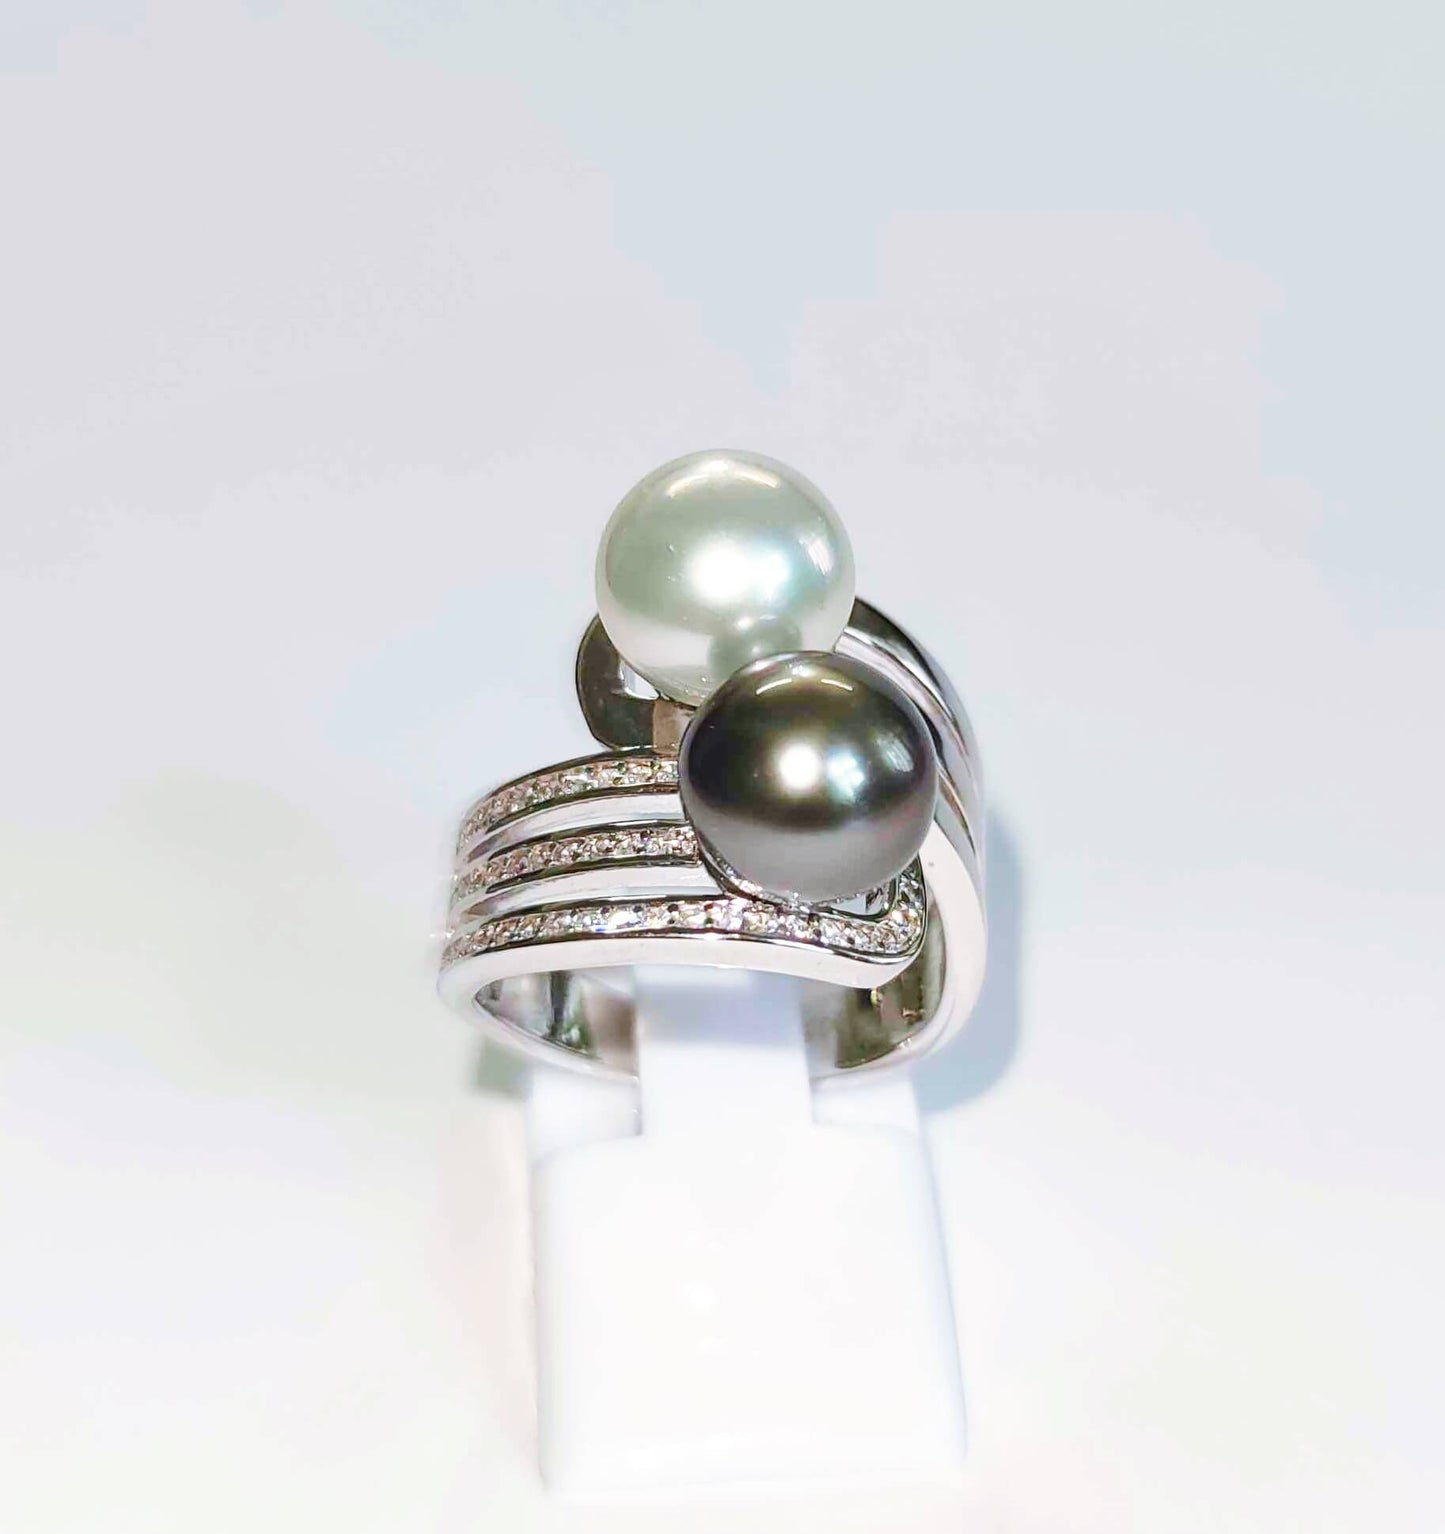 Silver Yin and Yang Ring with White and Black Sea Pearls and Zircons